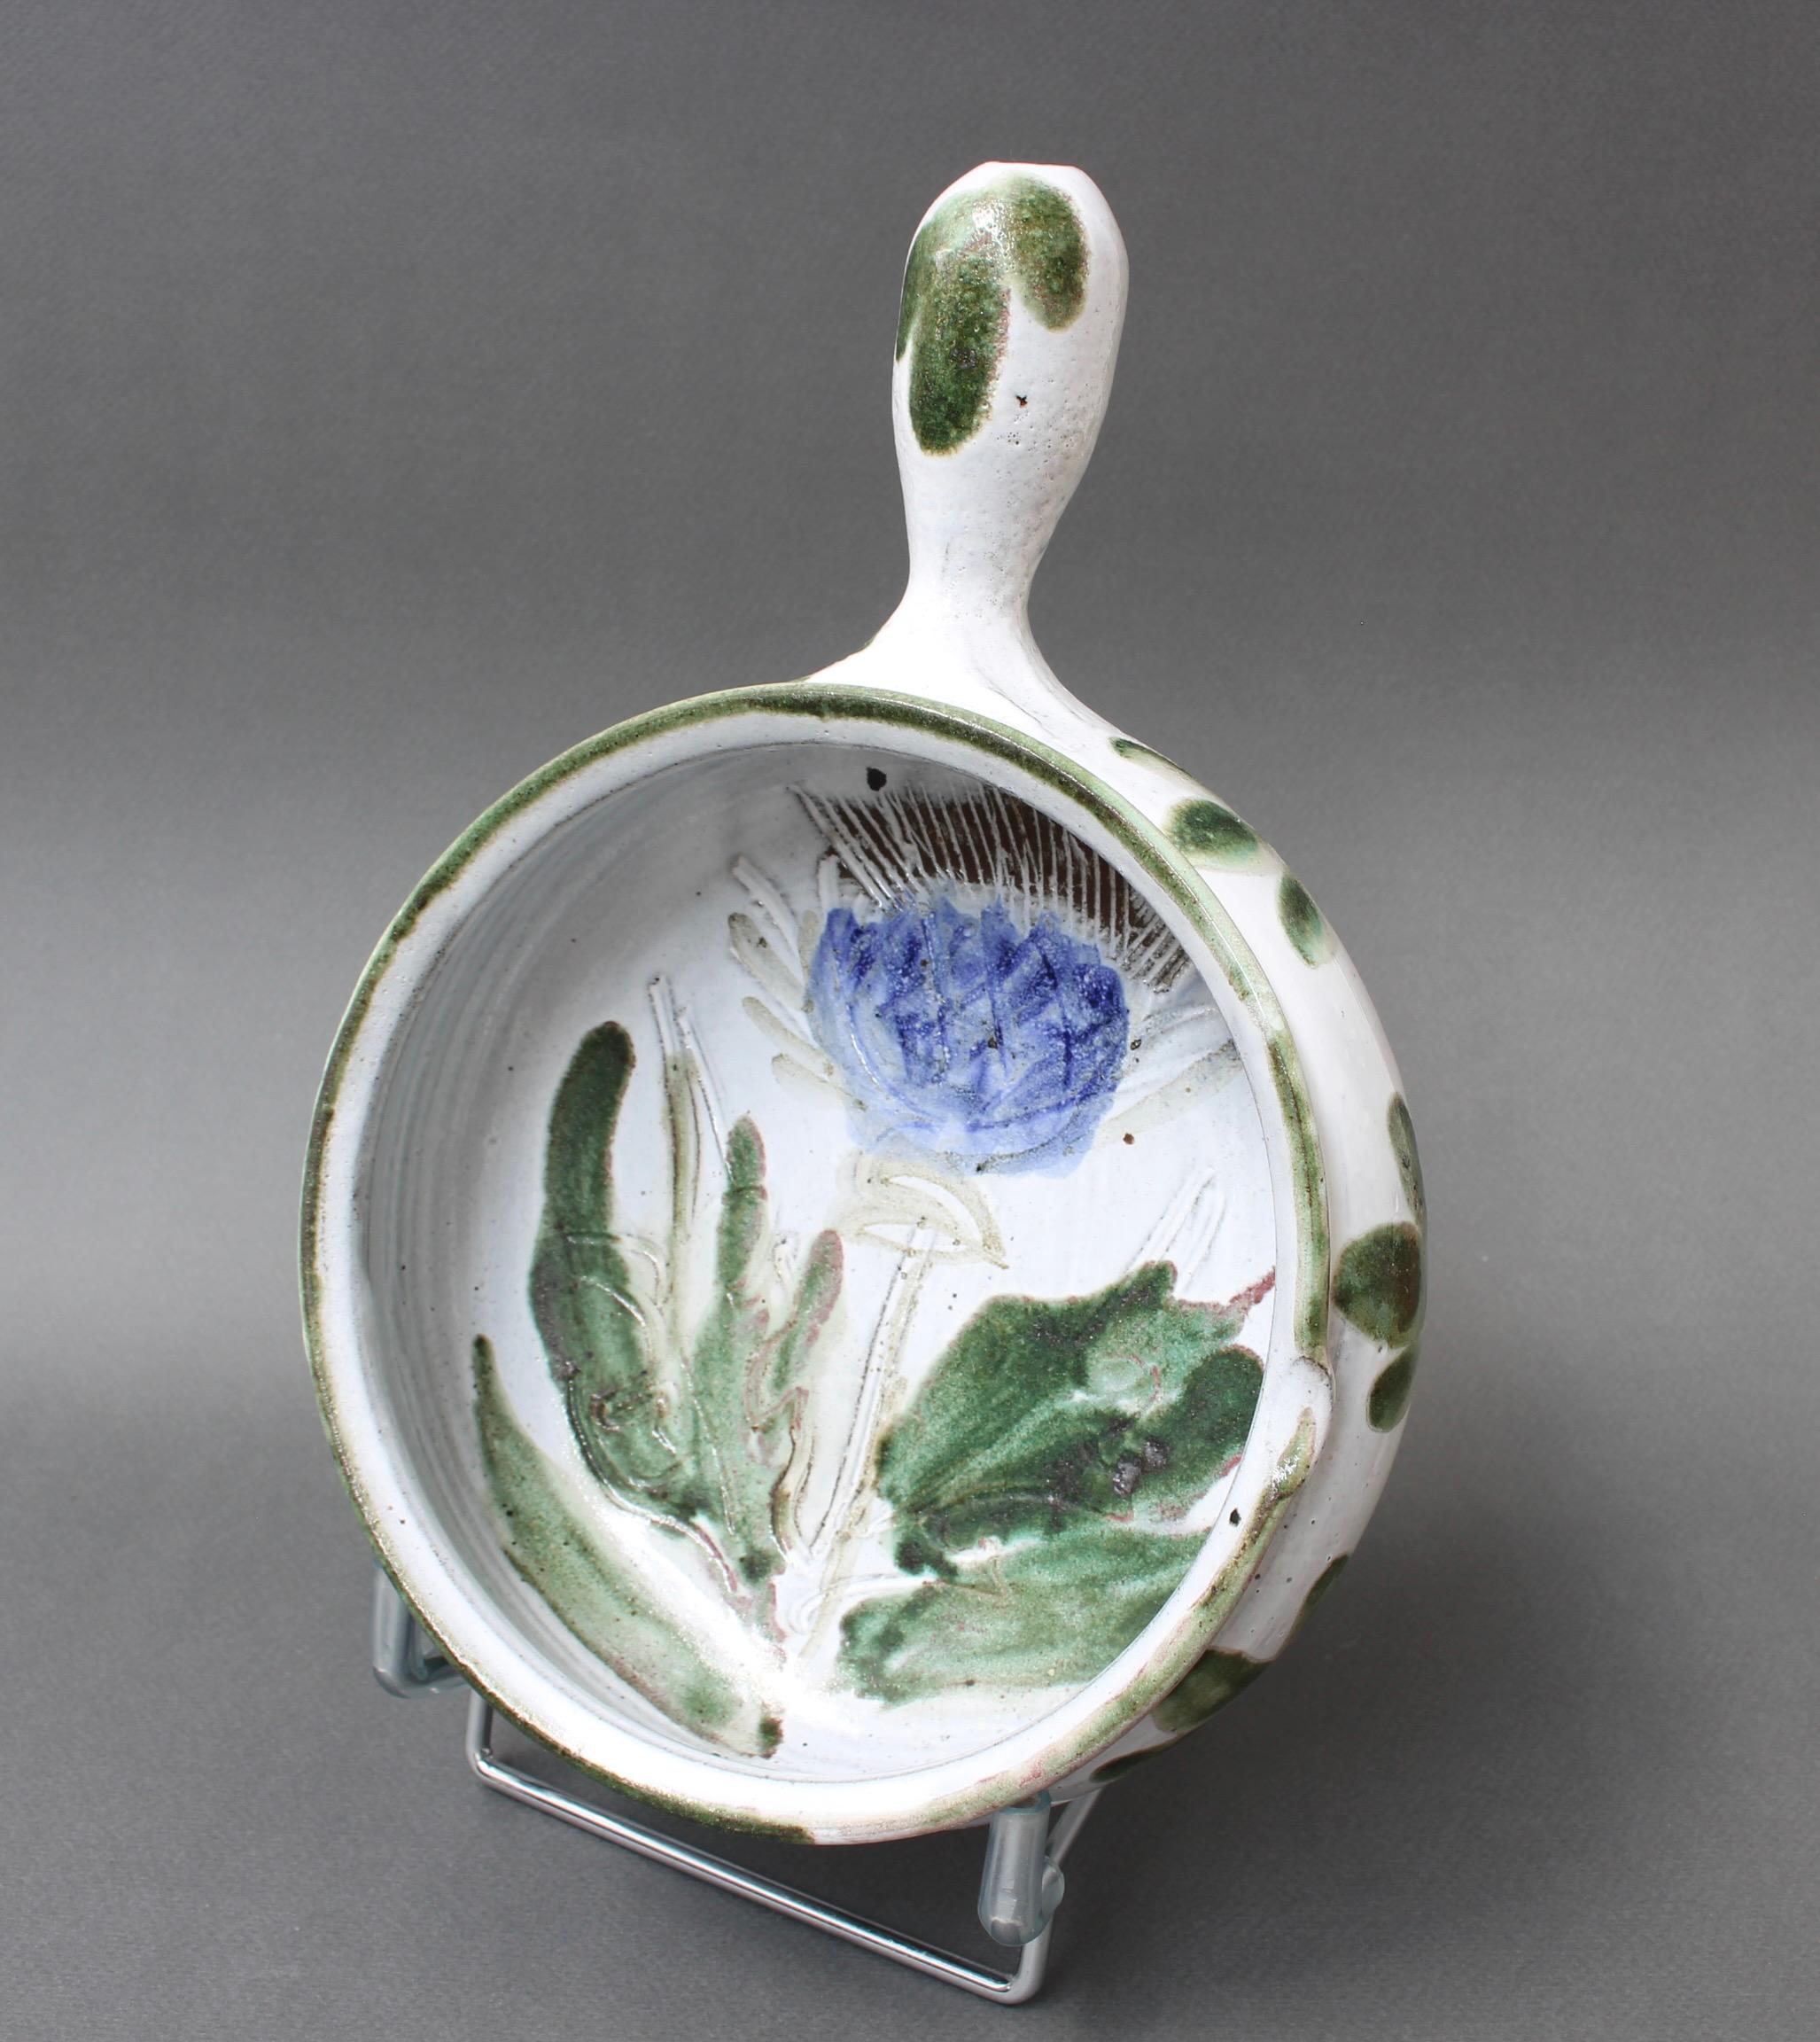 Mid-century decorative soup tureen / dish by Albert Thiry (circa 1960s). A creamy white glaze forms the backdrop for Thiry's trademark blue thistle and foliage decoration. Both visually appealing and tactile, the piece would make an excellent